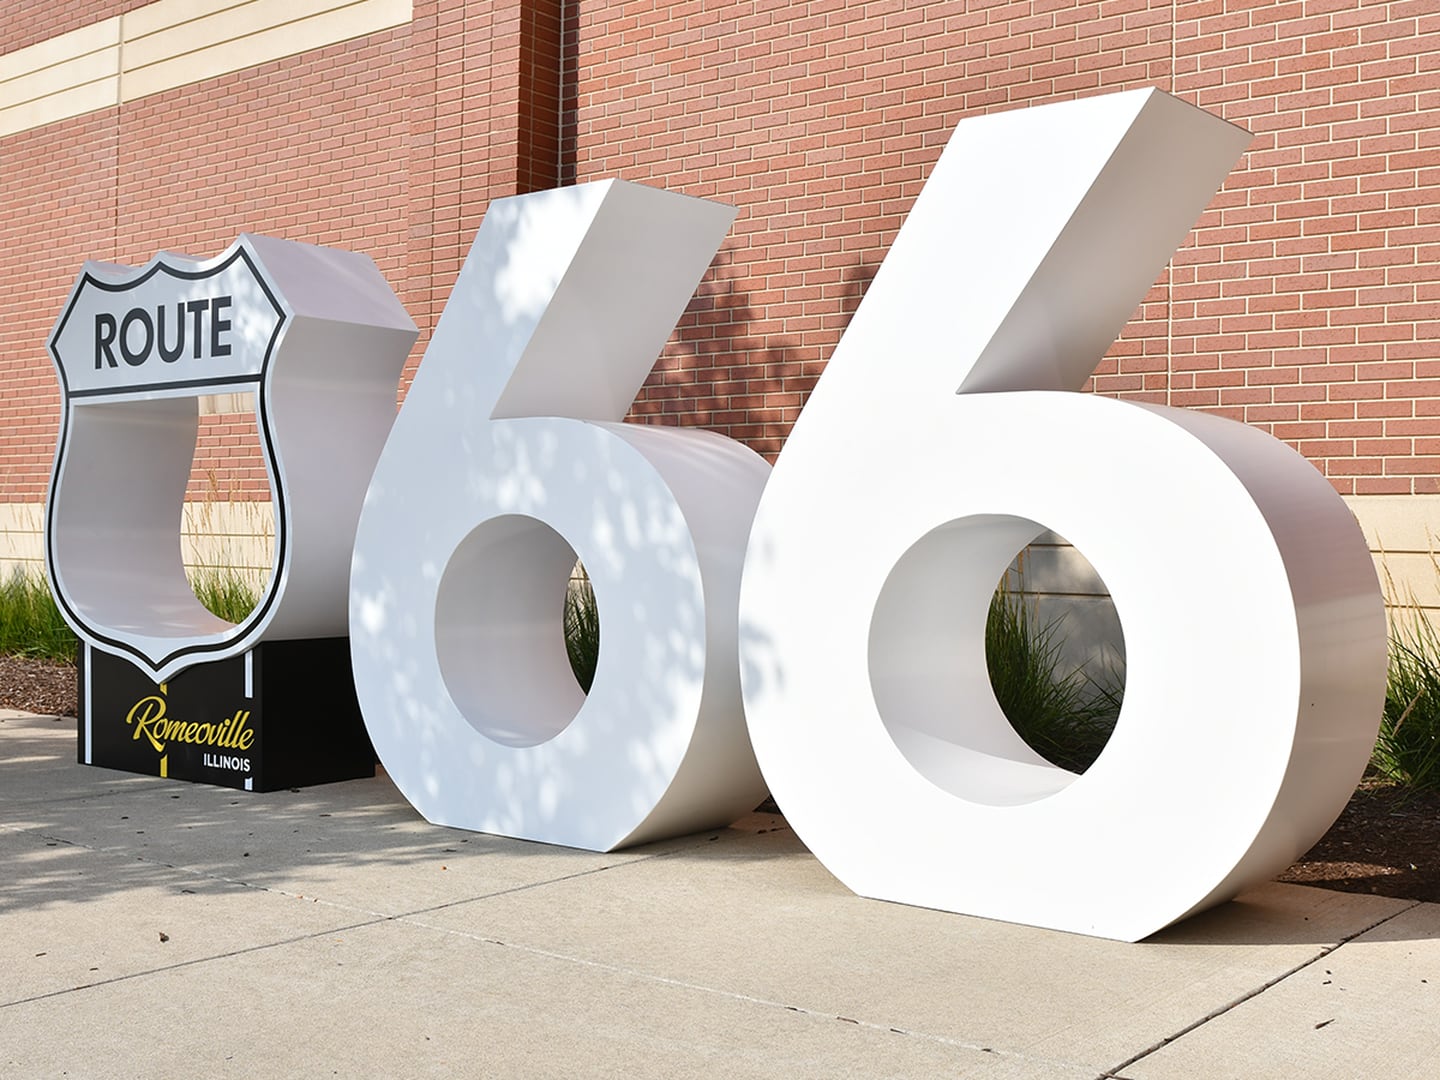 An interactive Route 66 sign has been placed outside the Romeoville Athletic and Event Center at 55 Phelps Ave. in Romeoville.